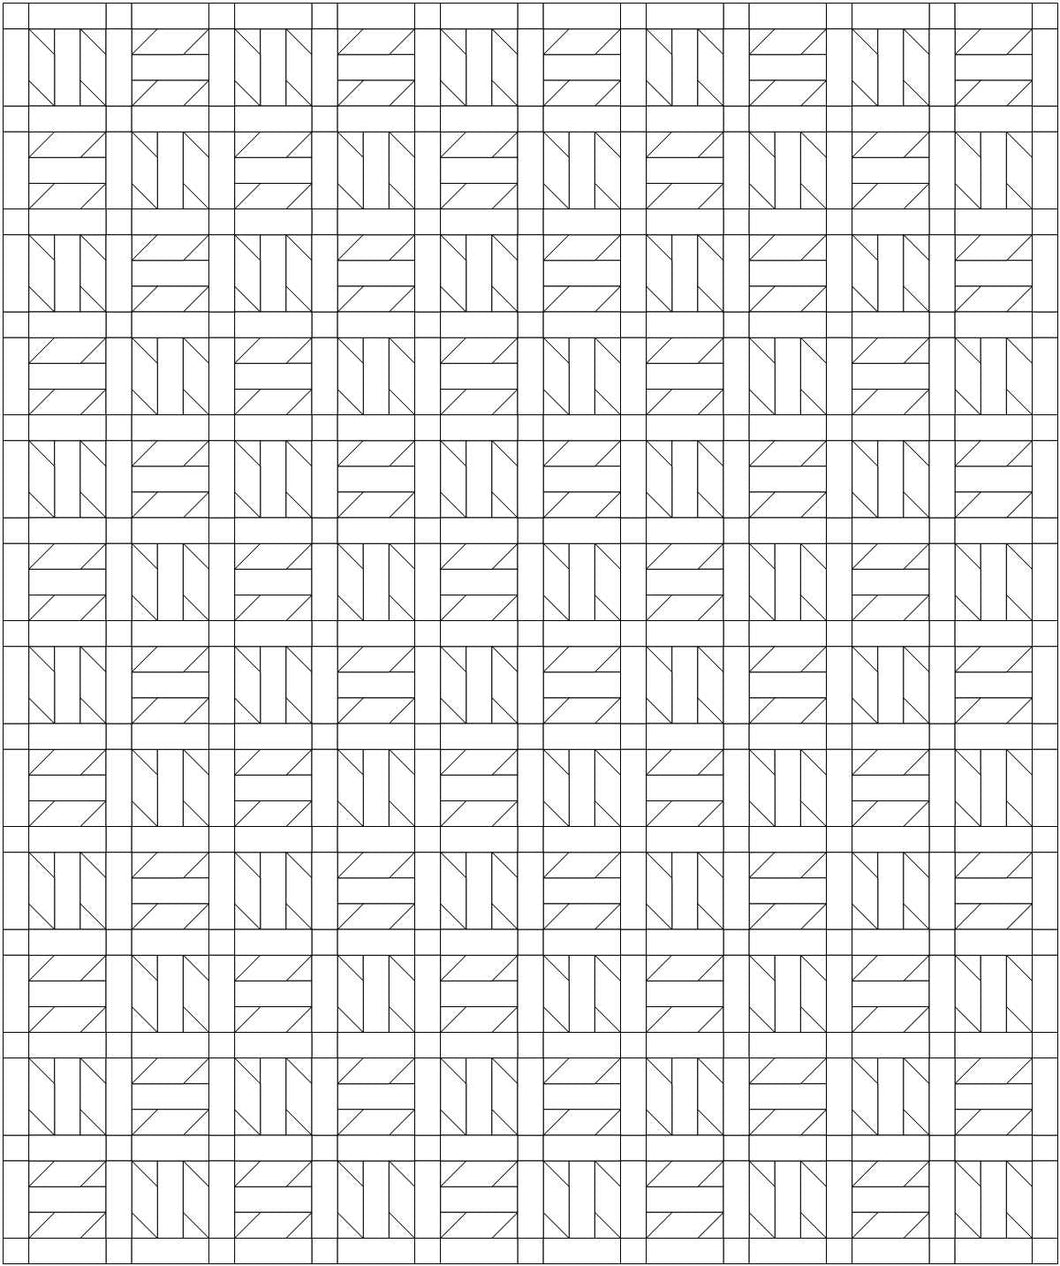 Propeller Quilt Pattern Coloring Page FREE PDF download